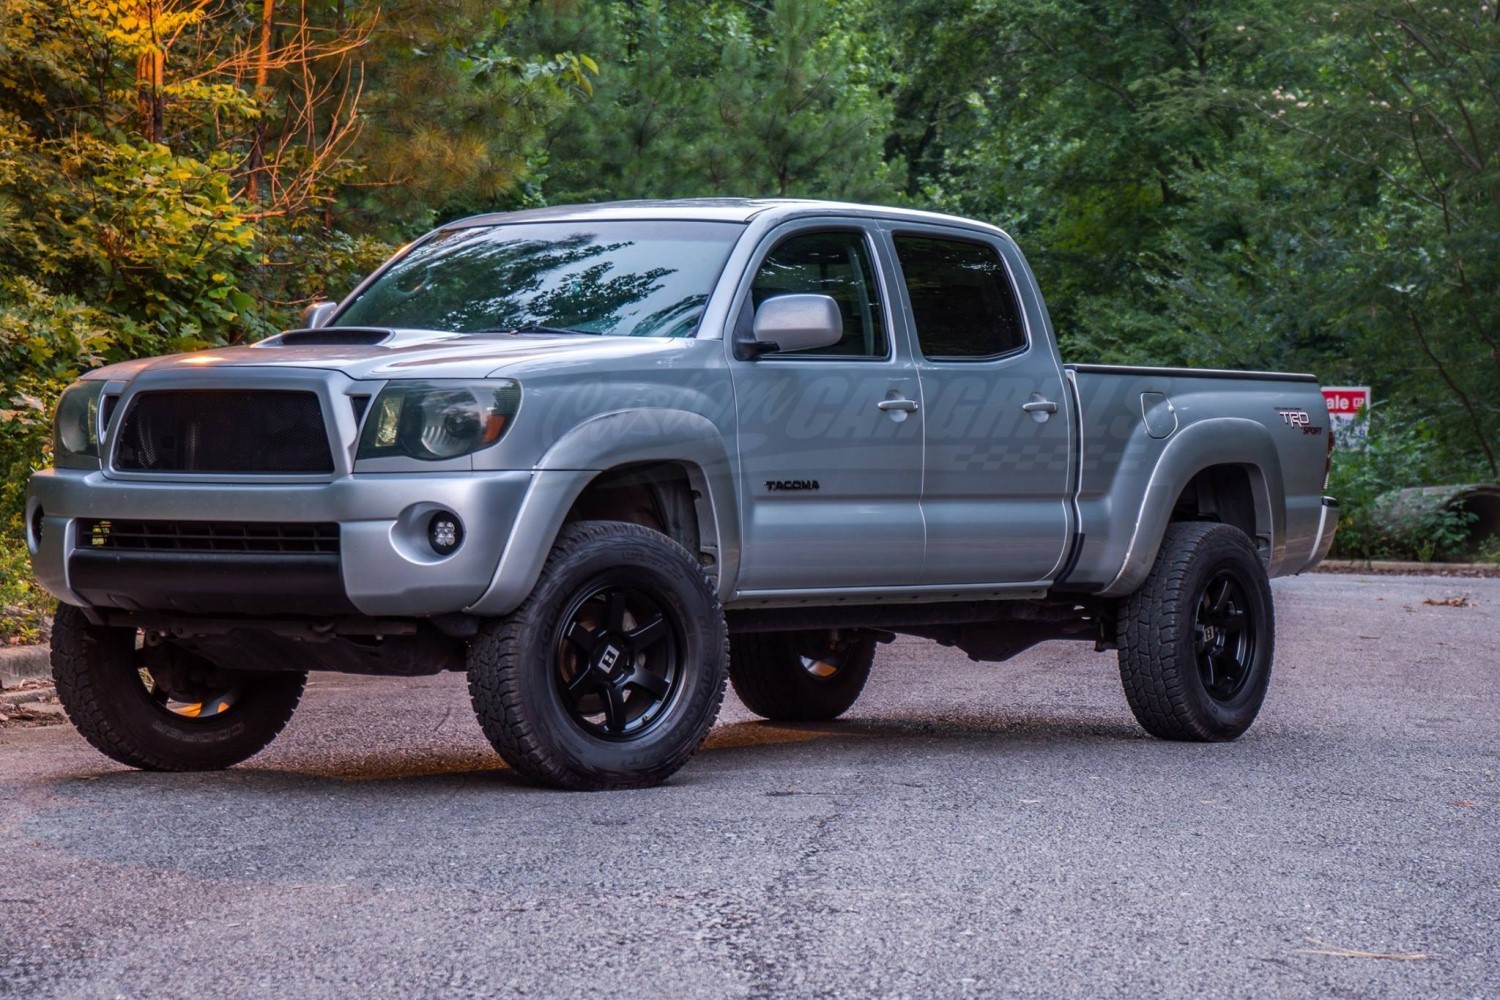 How Much Does a Toyota Tacoma Weight?